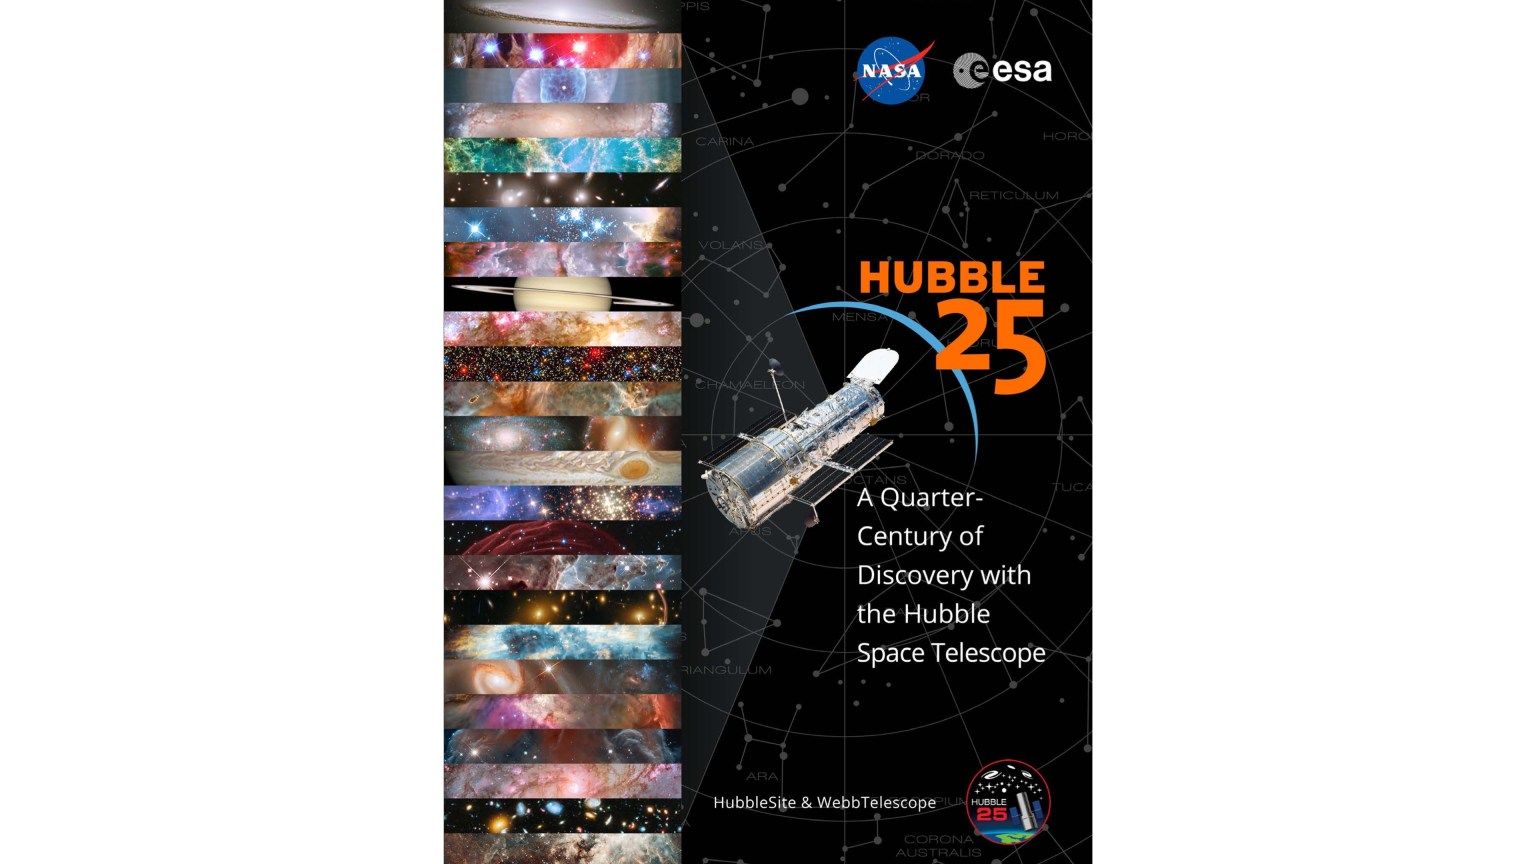 Hubble 25 - A Quarter Century of Discovery with the Hubble Space Telescope e-book cover